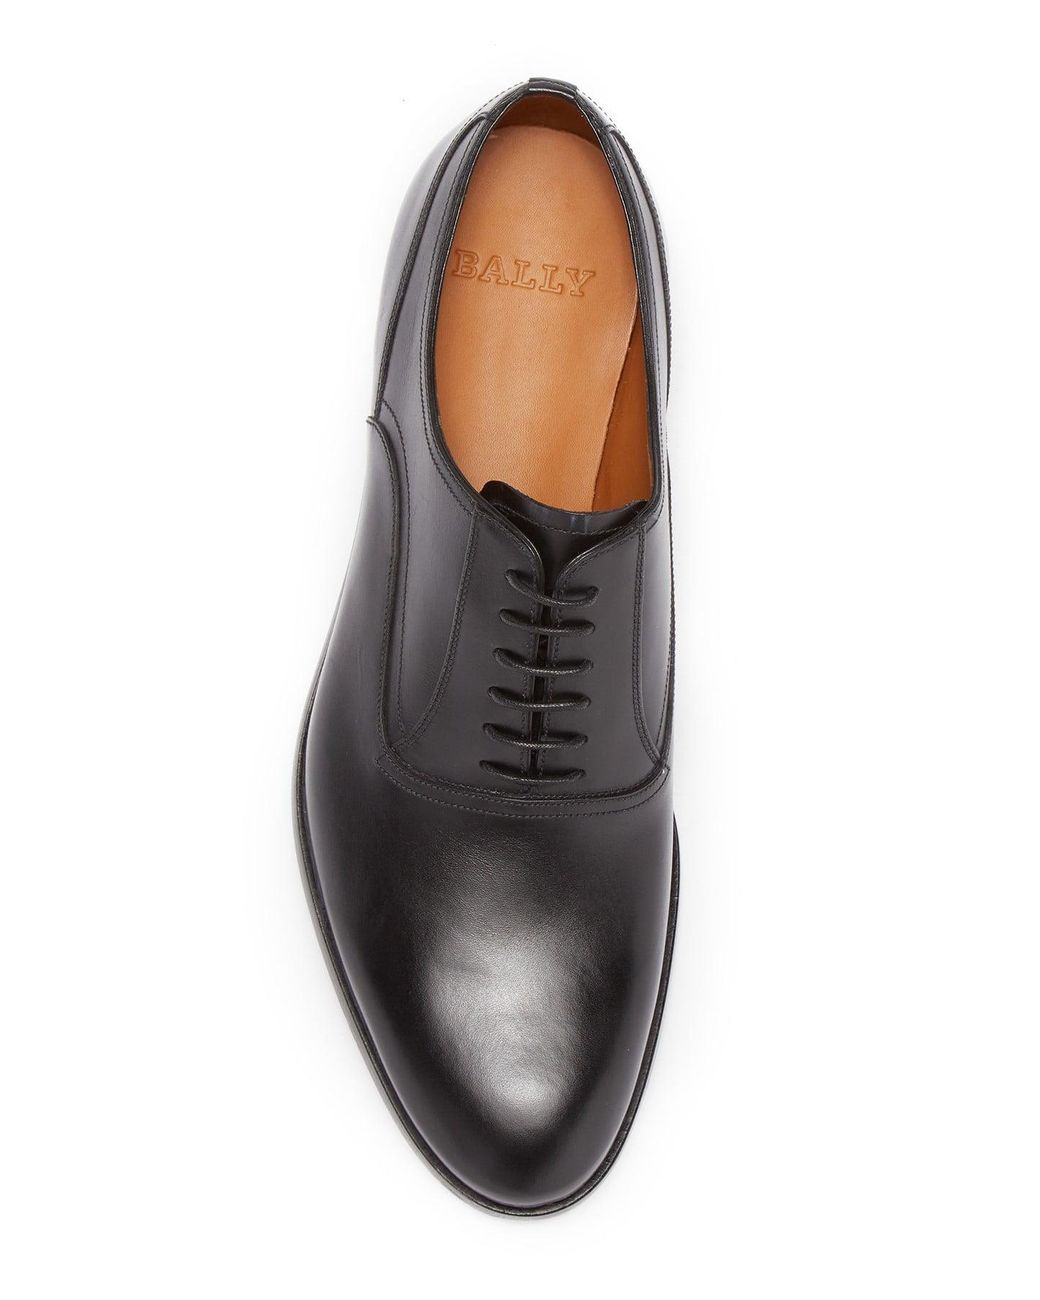 Bally Bromiel Leather Oxford in Black 